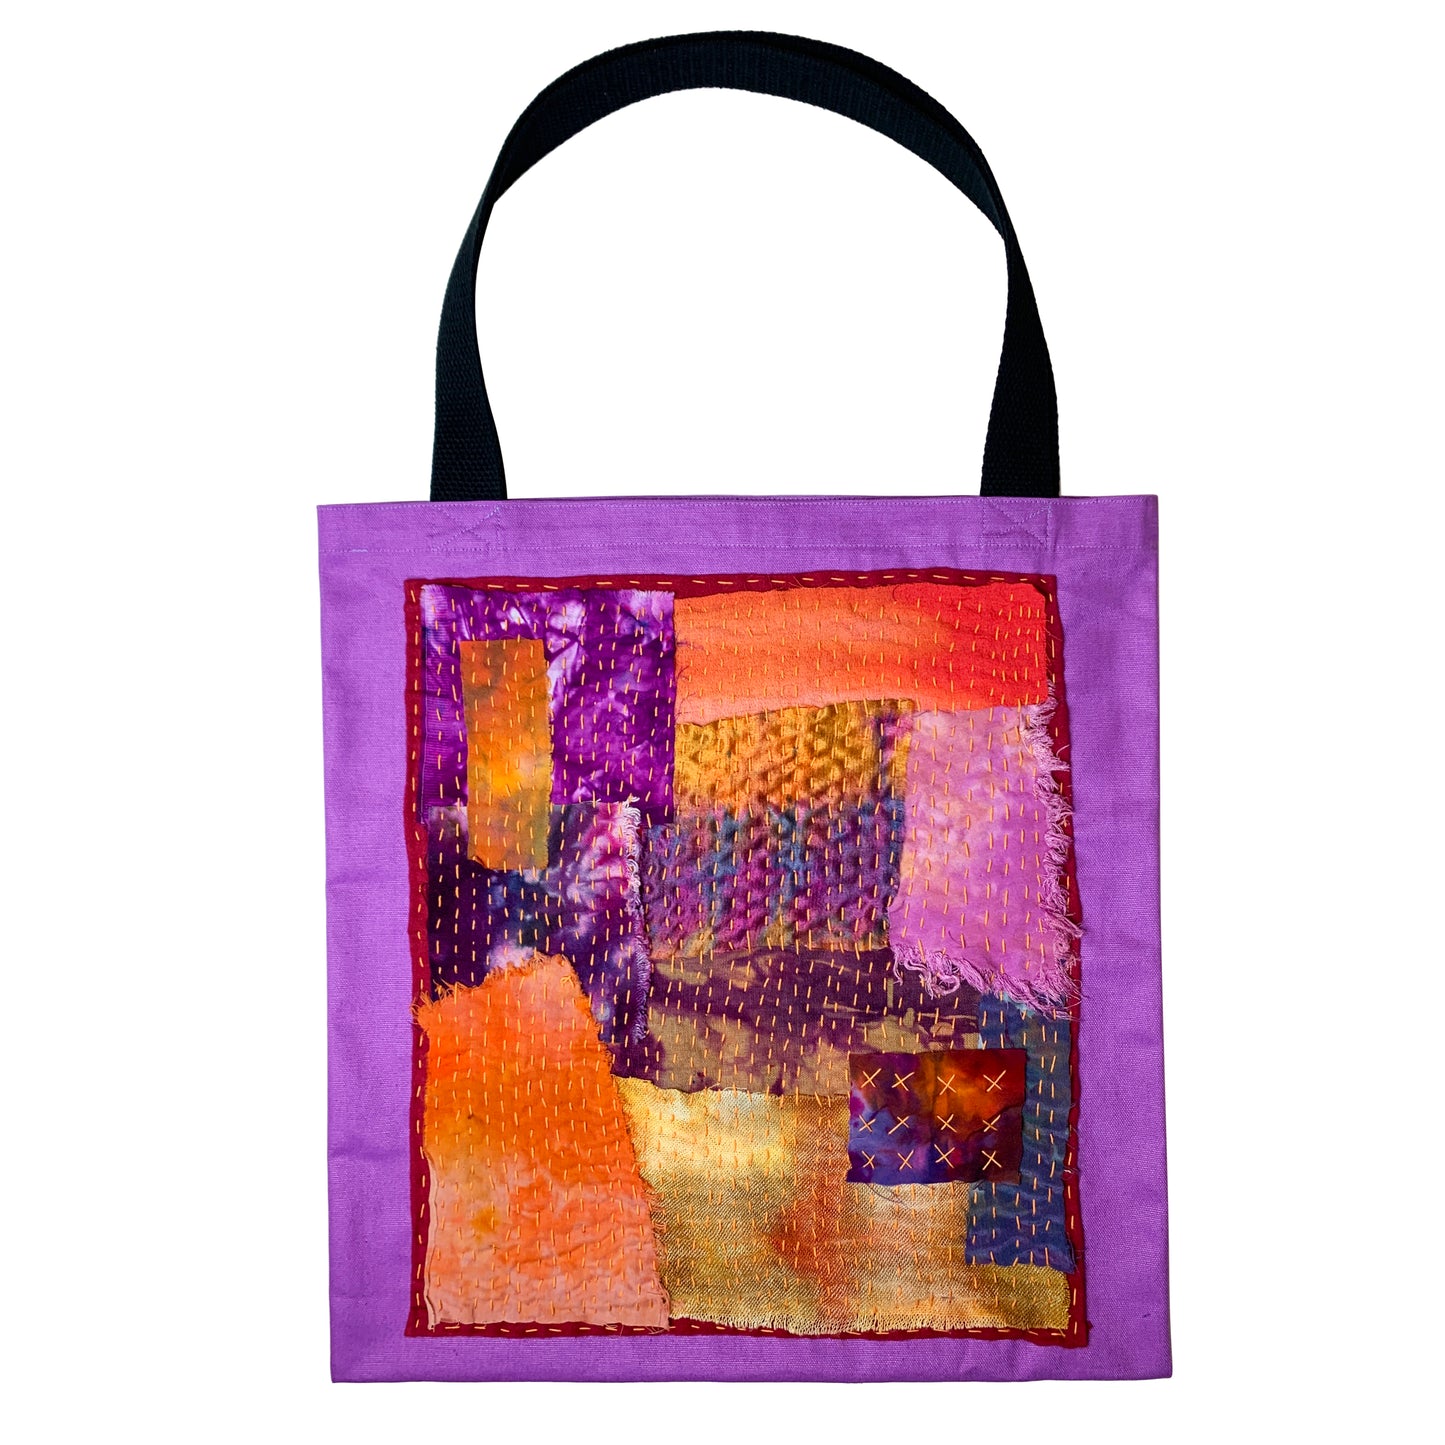 Make Your Own ONE OF A KIND tote bag